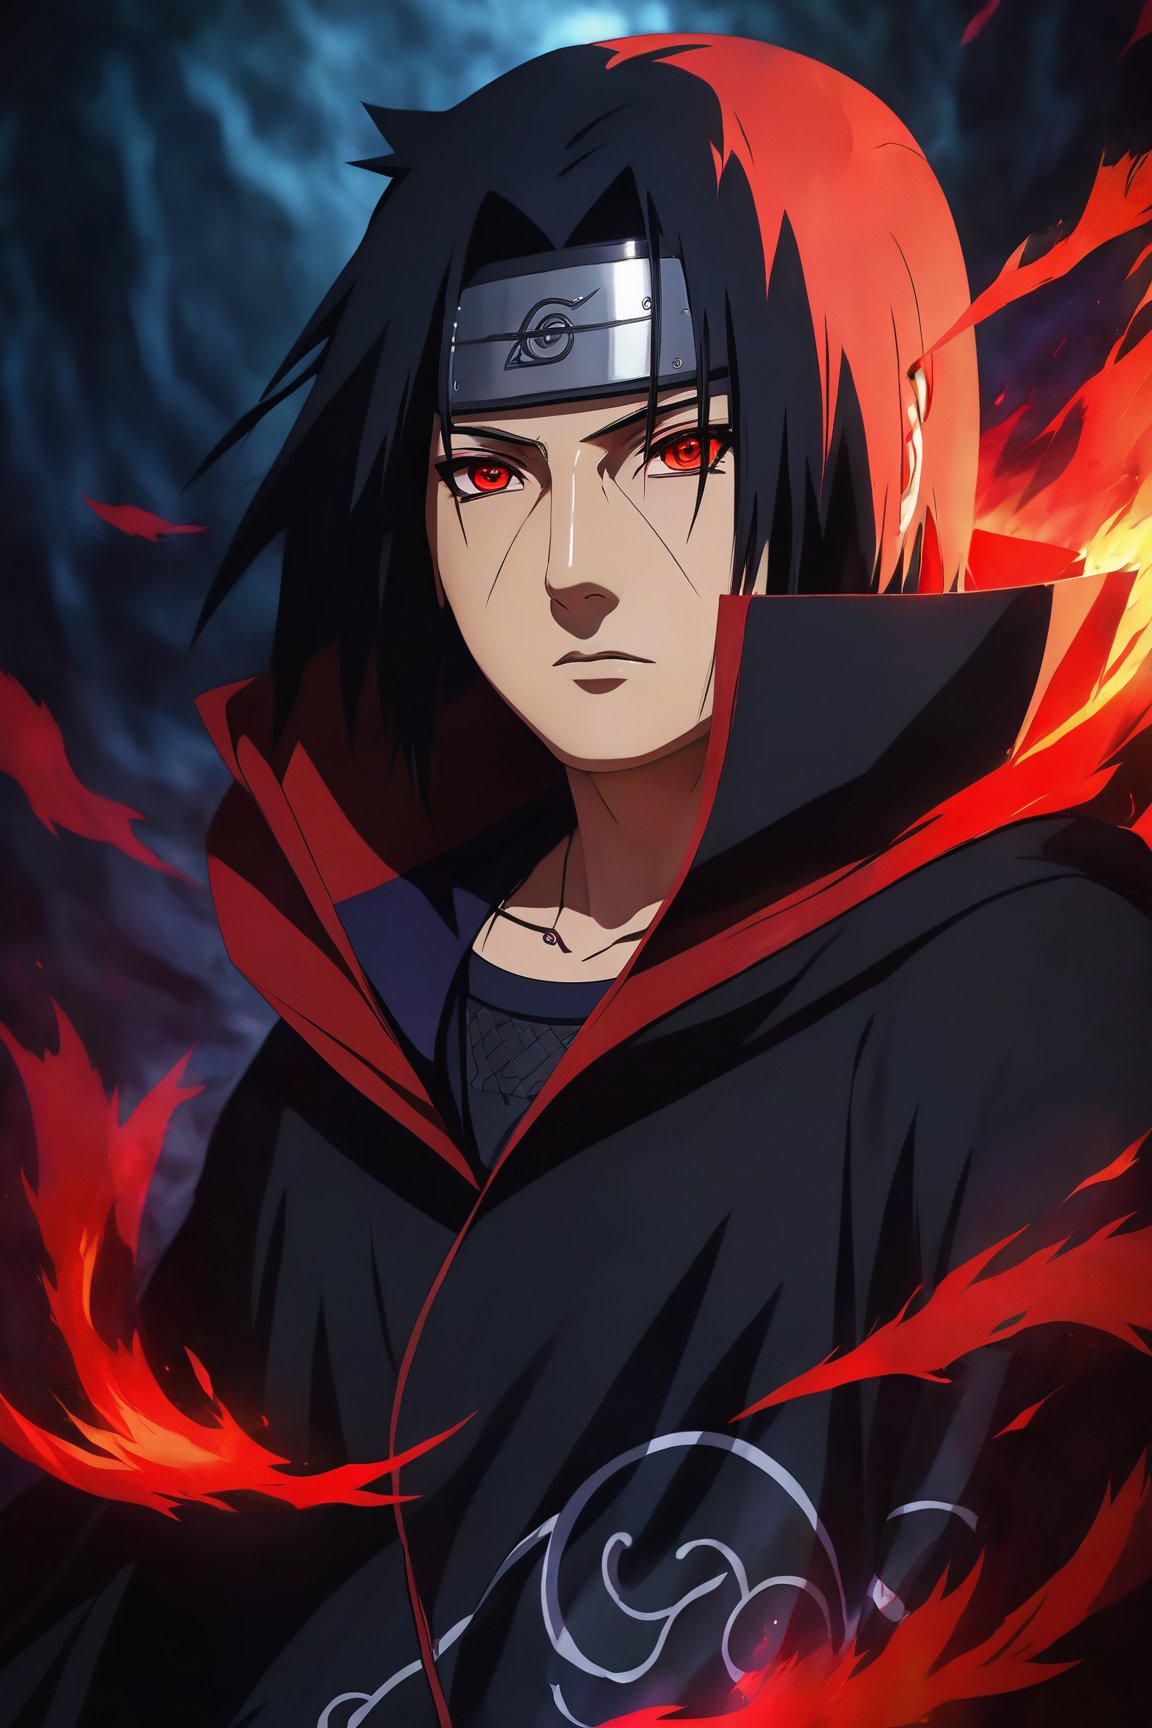 (realistic,portrait:1.2), Itachi Uchiha, detailed facial features, Sharingan eyes, black spiky hair, intense gaze, expressionless face, flowing cloak, mysterious background, dark color palette, dramatic lighting, high contrast, vivid colors, fine details, emotionally captivating, skilled ninja, powerful aura, profound character